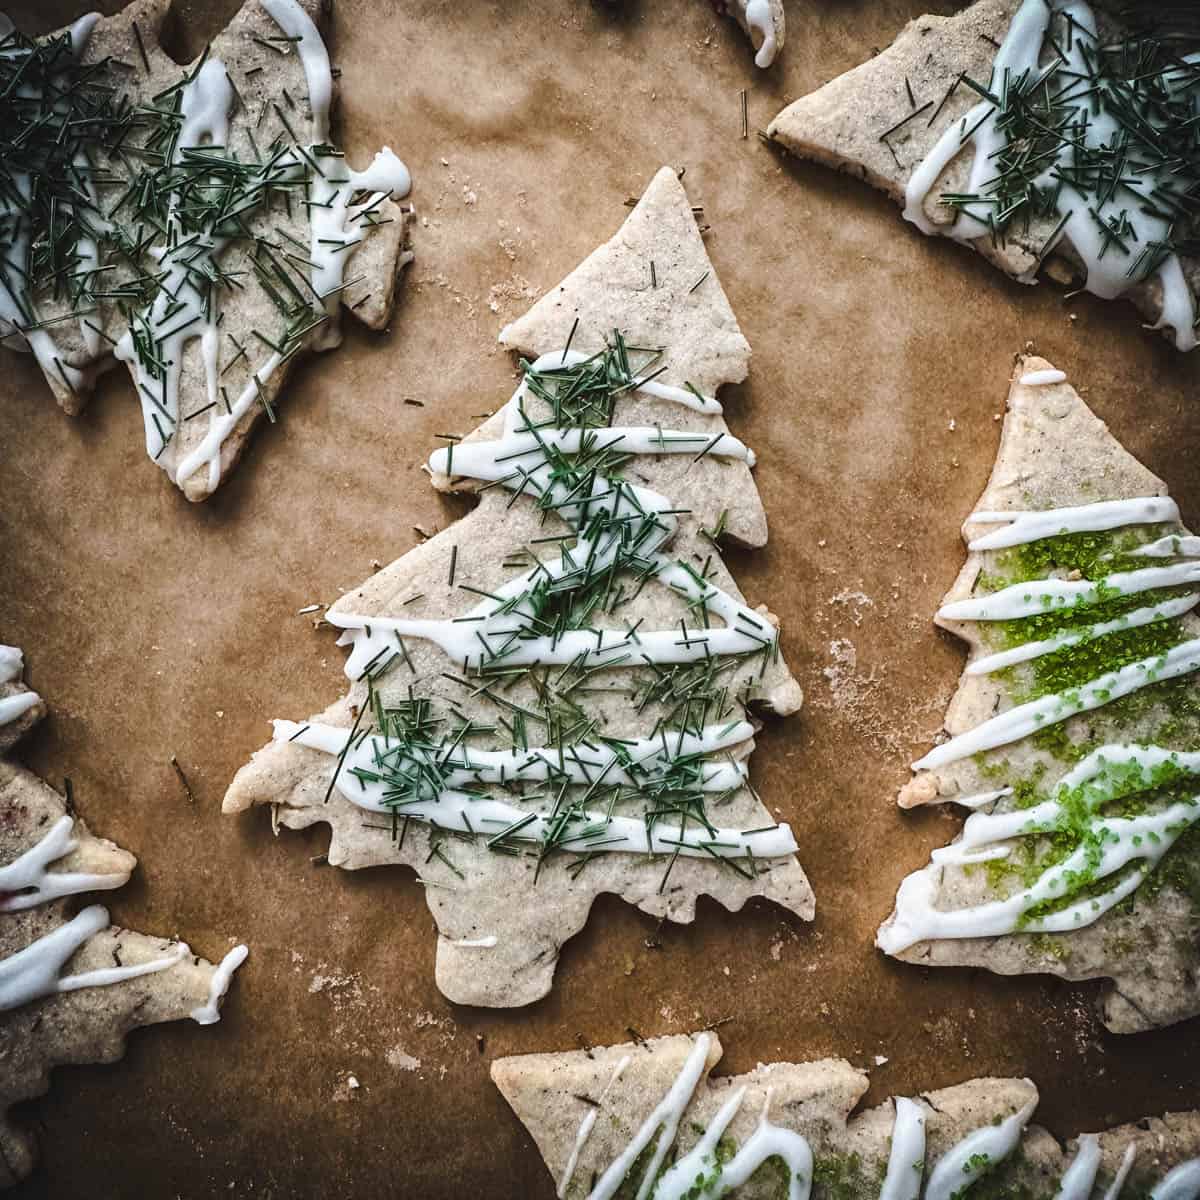 Tree shaped sugar cookies with pine needles and icing on top, on a wood surface.